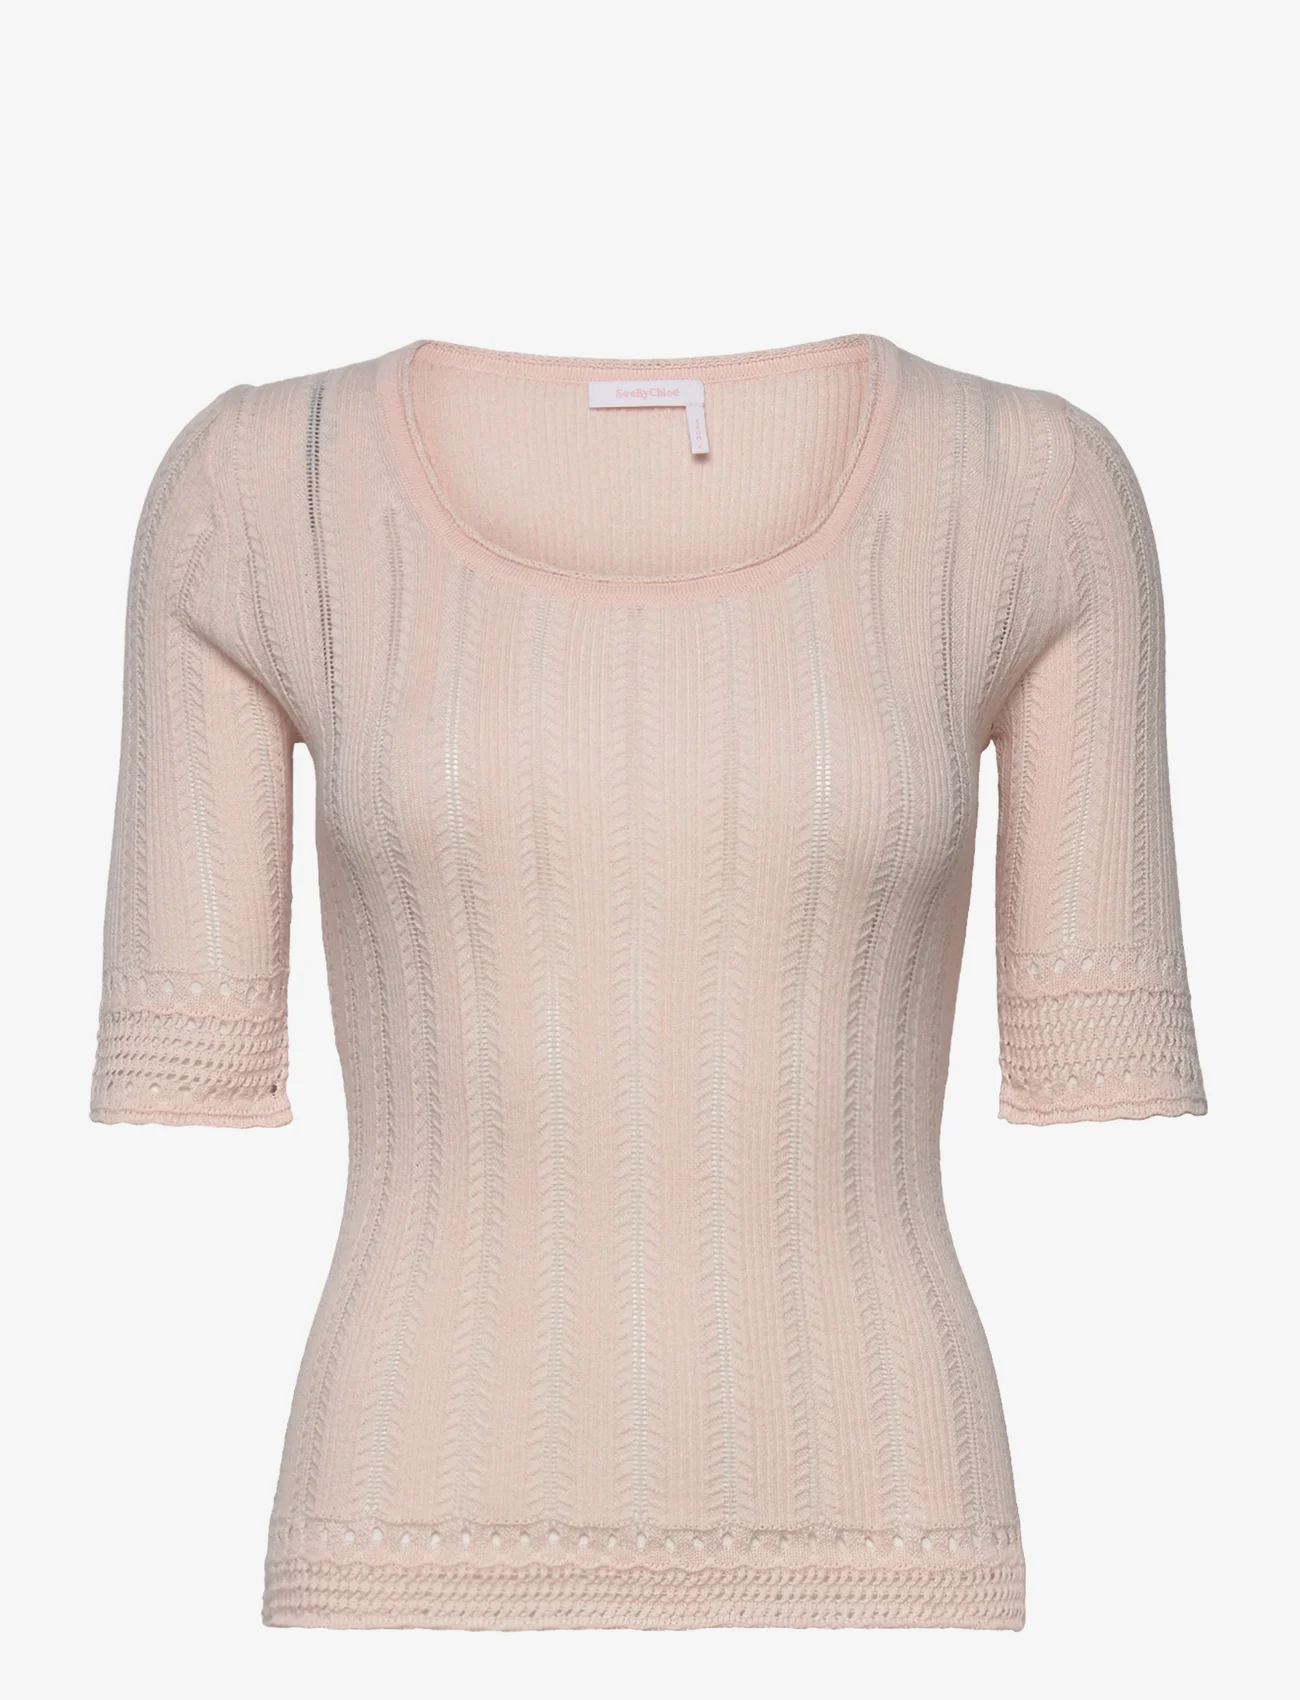 See by Chloé - Pullover - trøjer - natural pink - 0